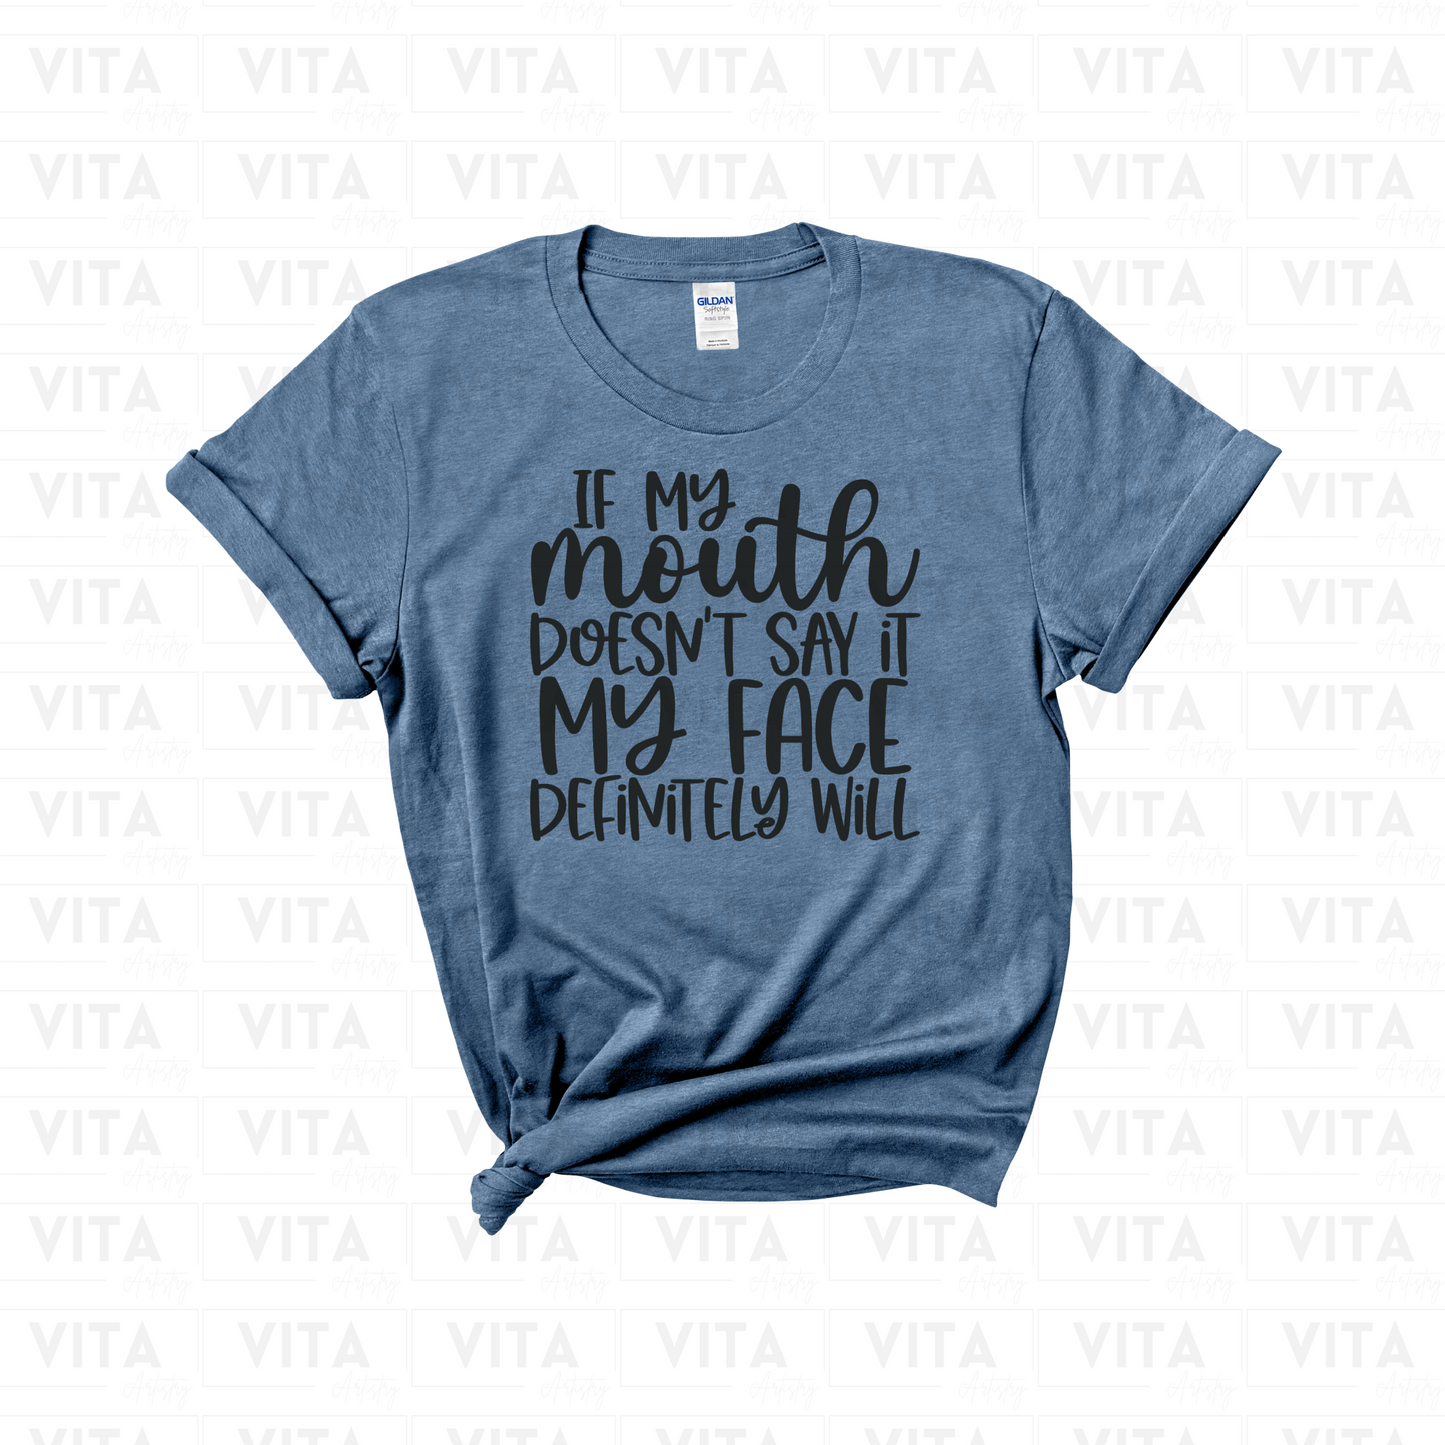 If My Mouth Doesn't Say It My Face Definitely Will - Sarcastic Soft Style T-Shirt (Choose your shirt color)